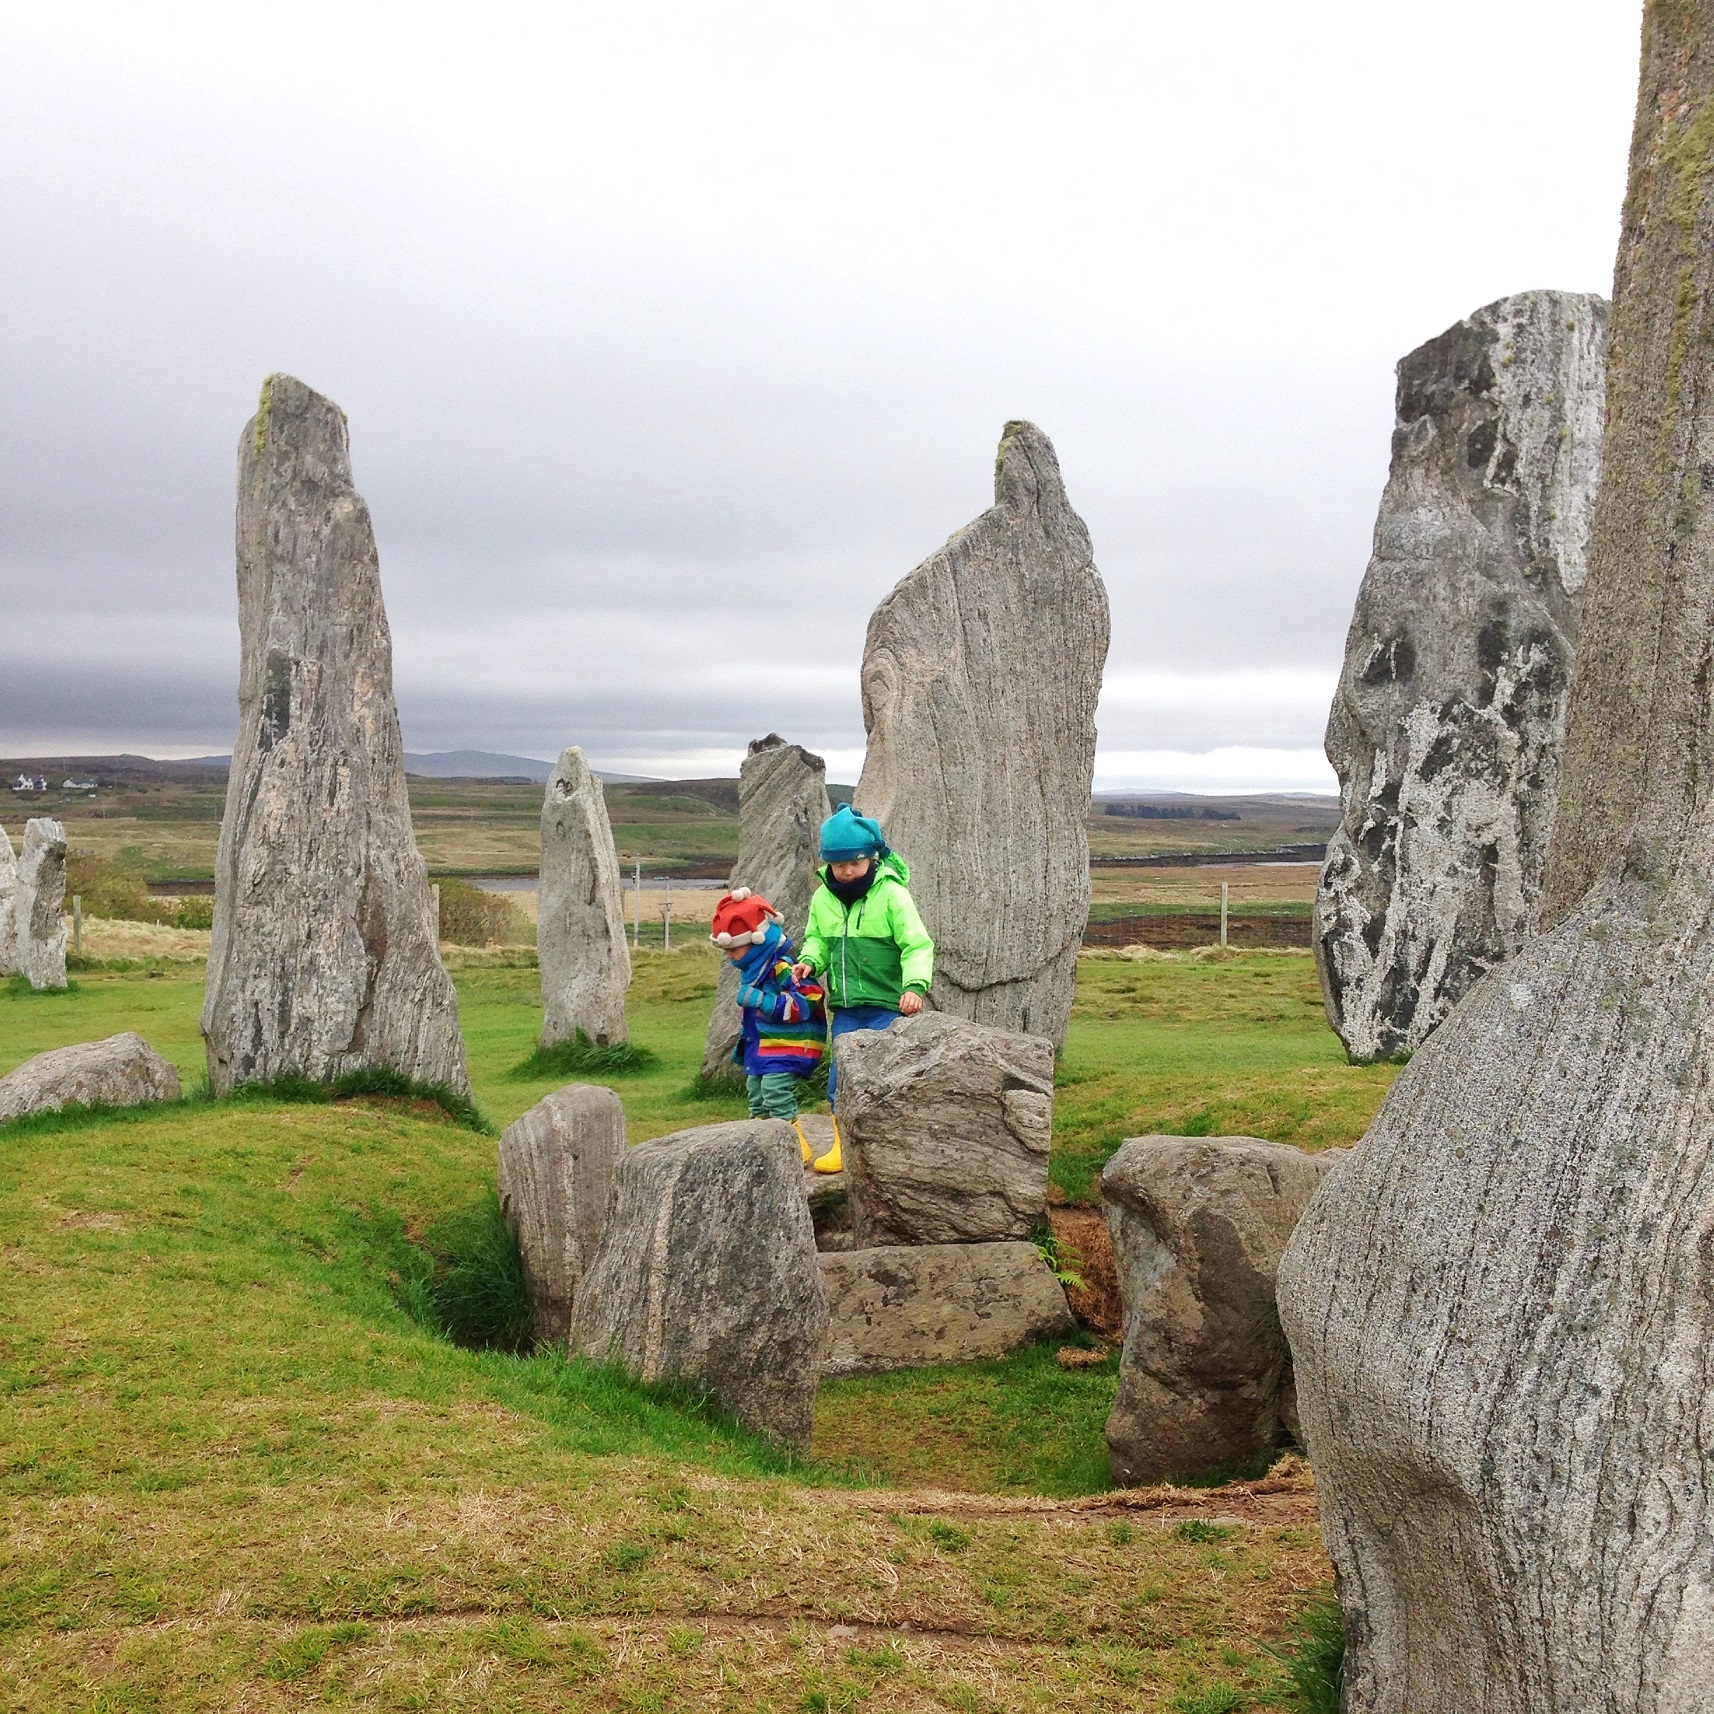 Two children walking between the Calanais Standing Stones. The children are wrapped up warm in colourful rain jackets and wellies and hats. It looks like it's about to rain.